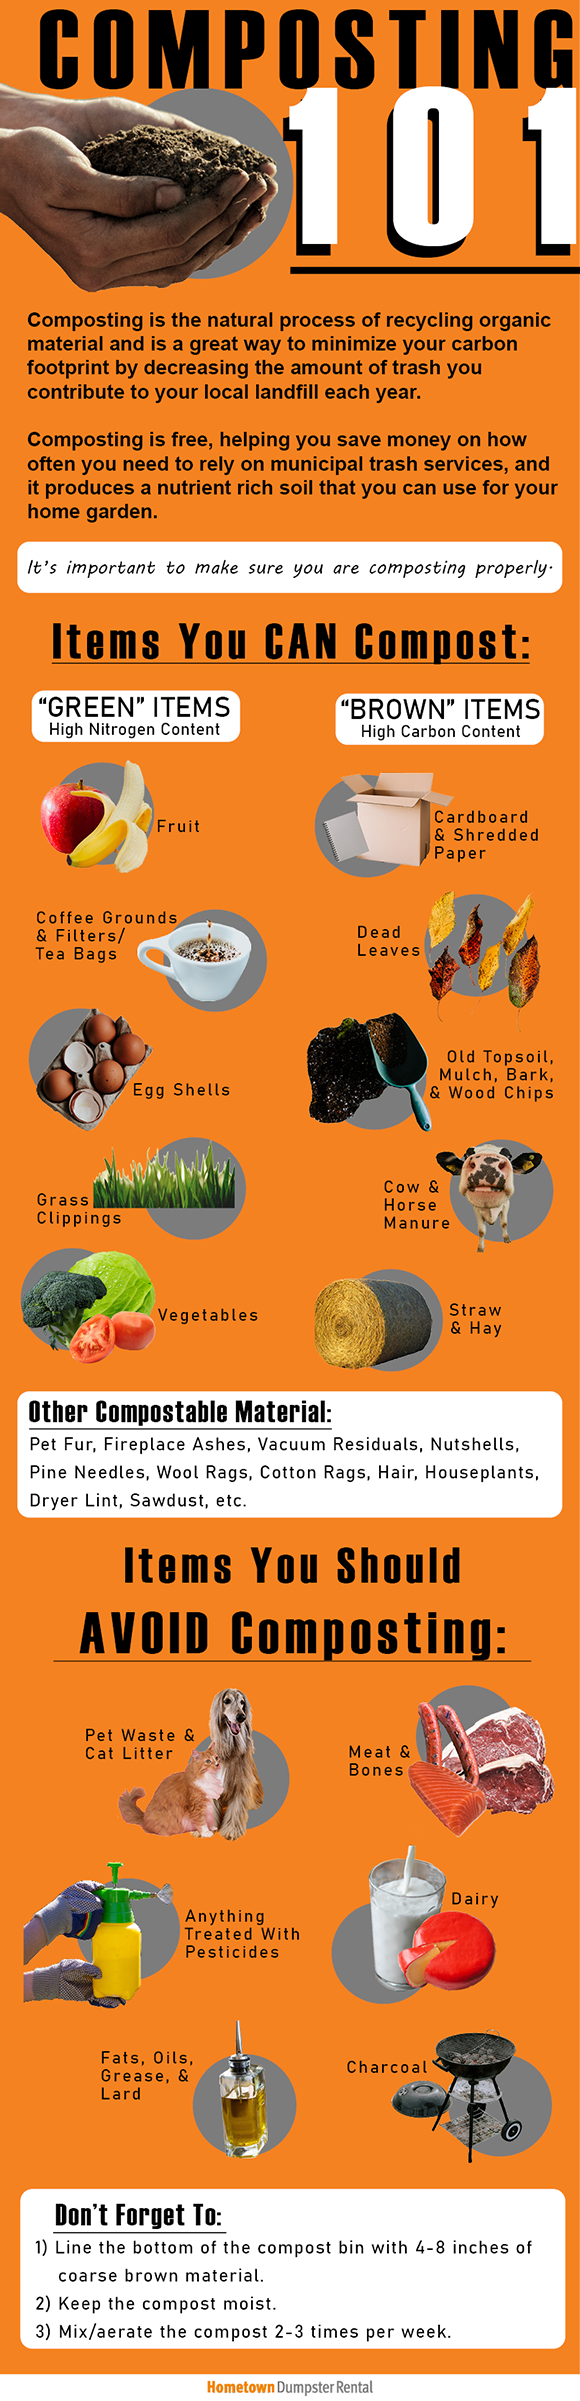 guide to composting infographic